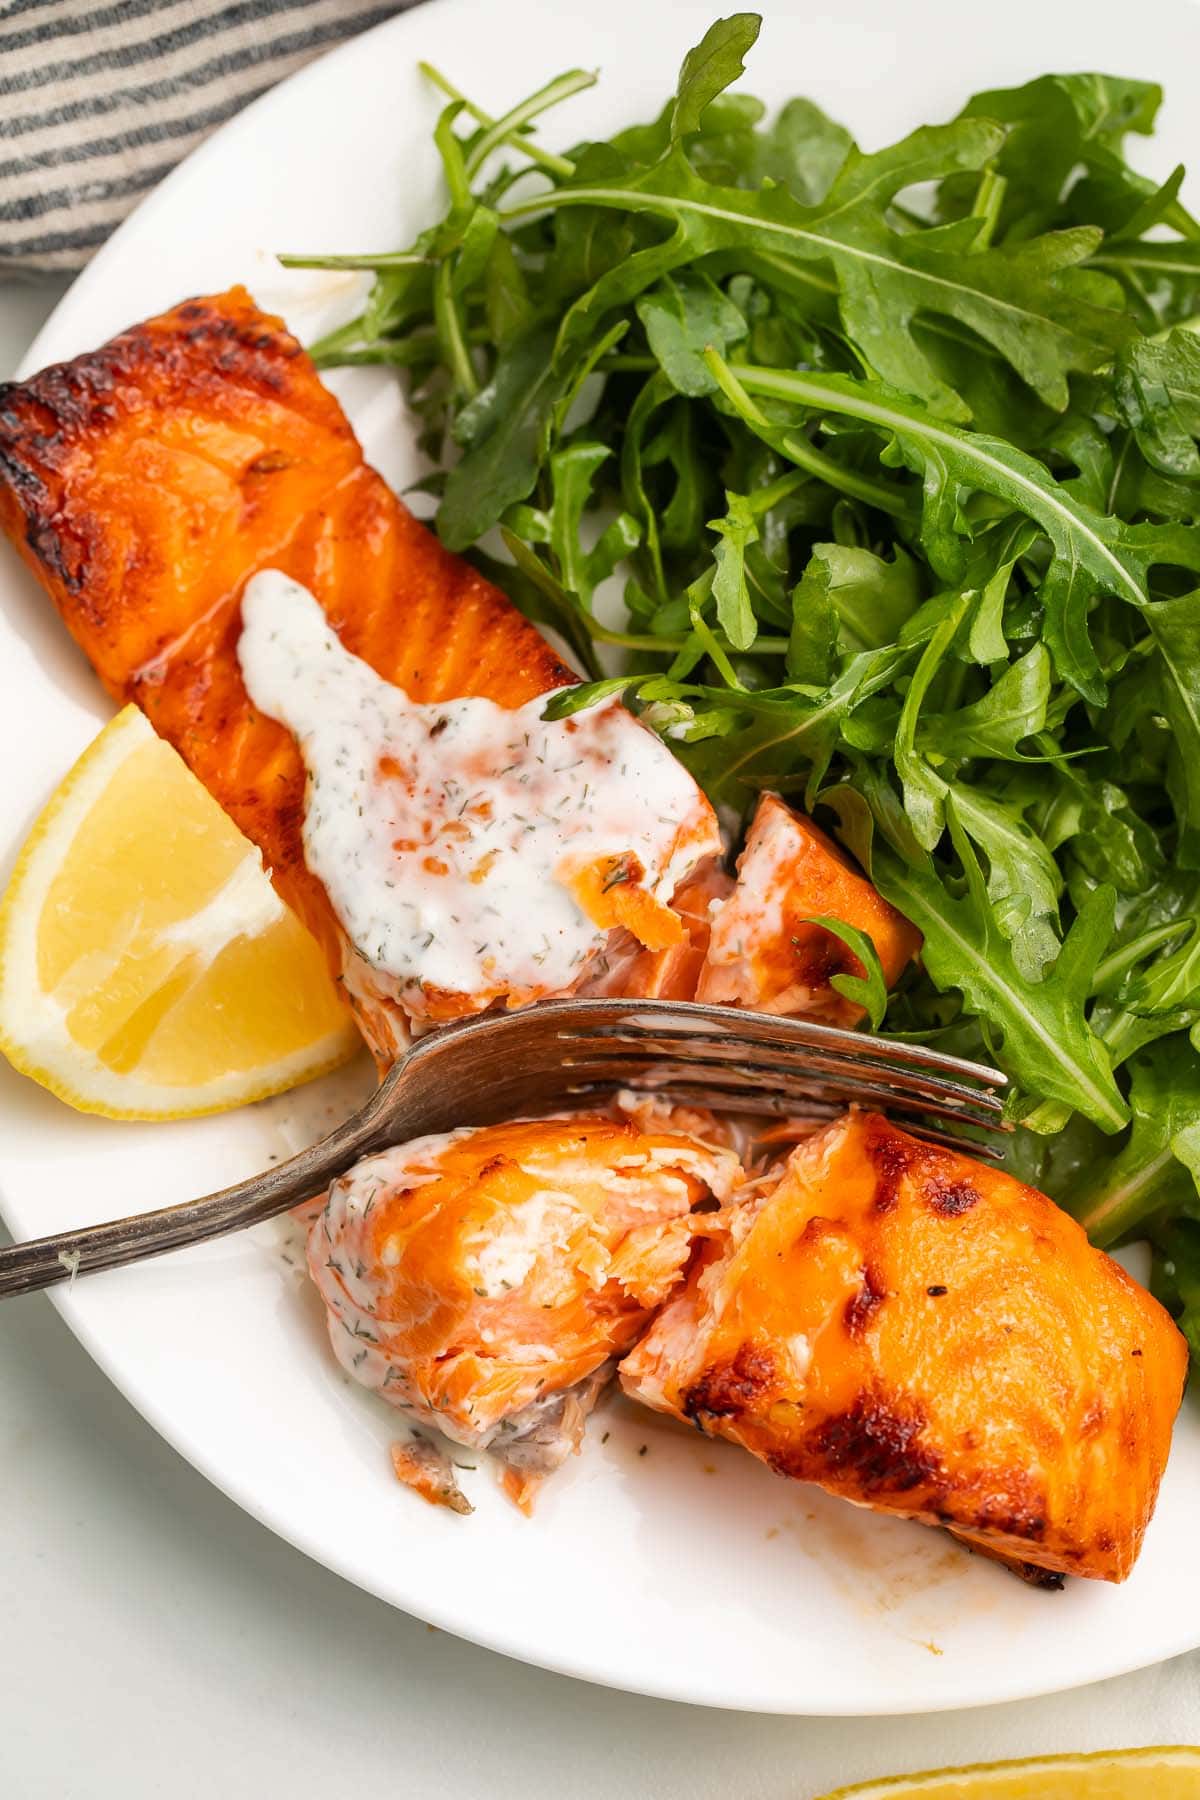 A salmon fillet, cooked in an air fryer, topped with a creamy dill sauce and served with a small salad.